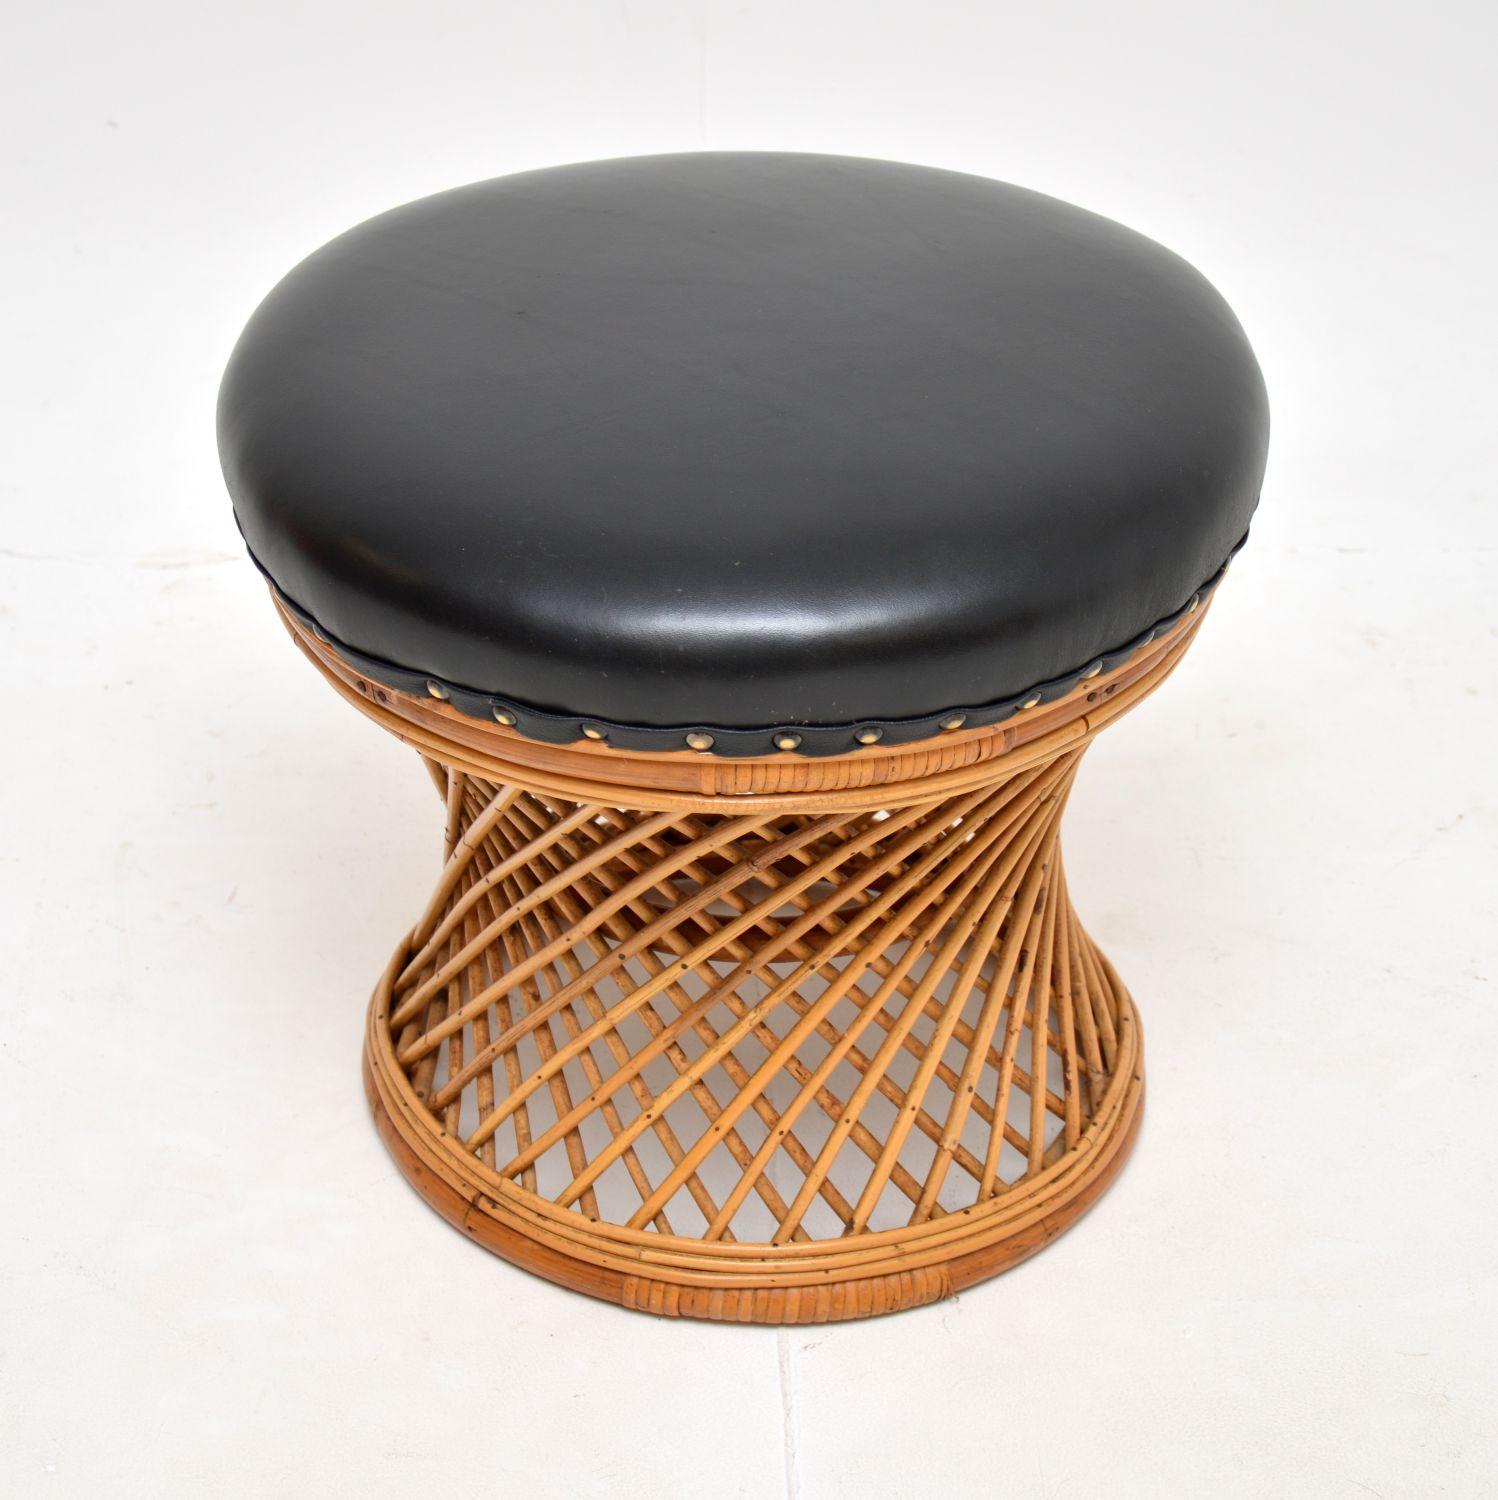 A stylish and unusual vintage bamboo and wicker stool with a black leather seat. This was made in England, it dates from around the 1970’s.

It is a lovely size and is beautifully made. The woven rattan frame has an hourglass shape, and the black